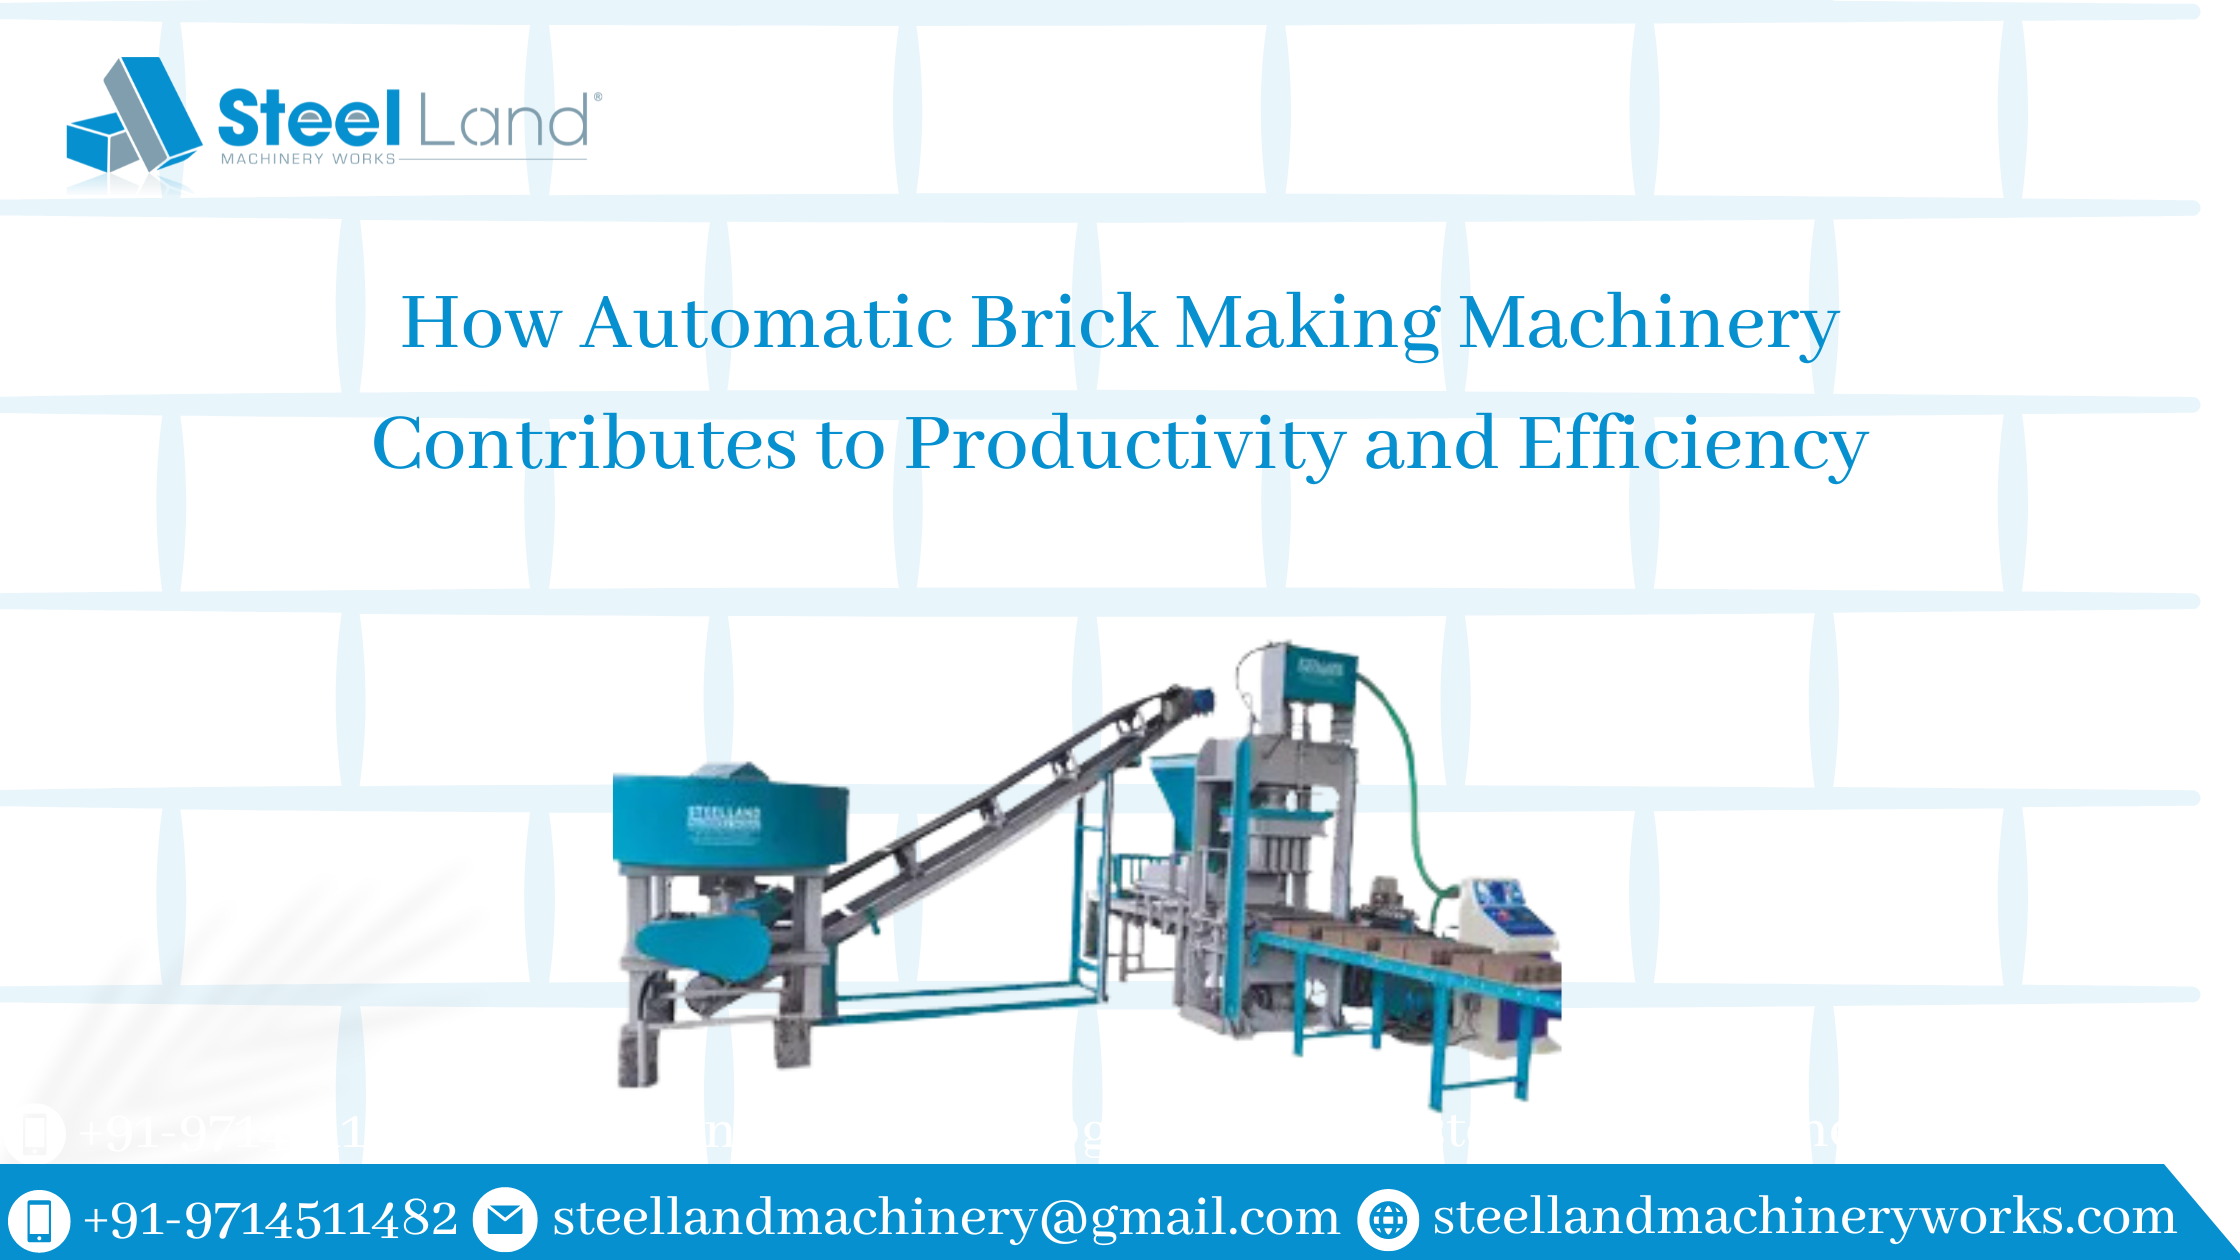 How Does Automatic Brick Making Machine Increases Productivity and Efficiency